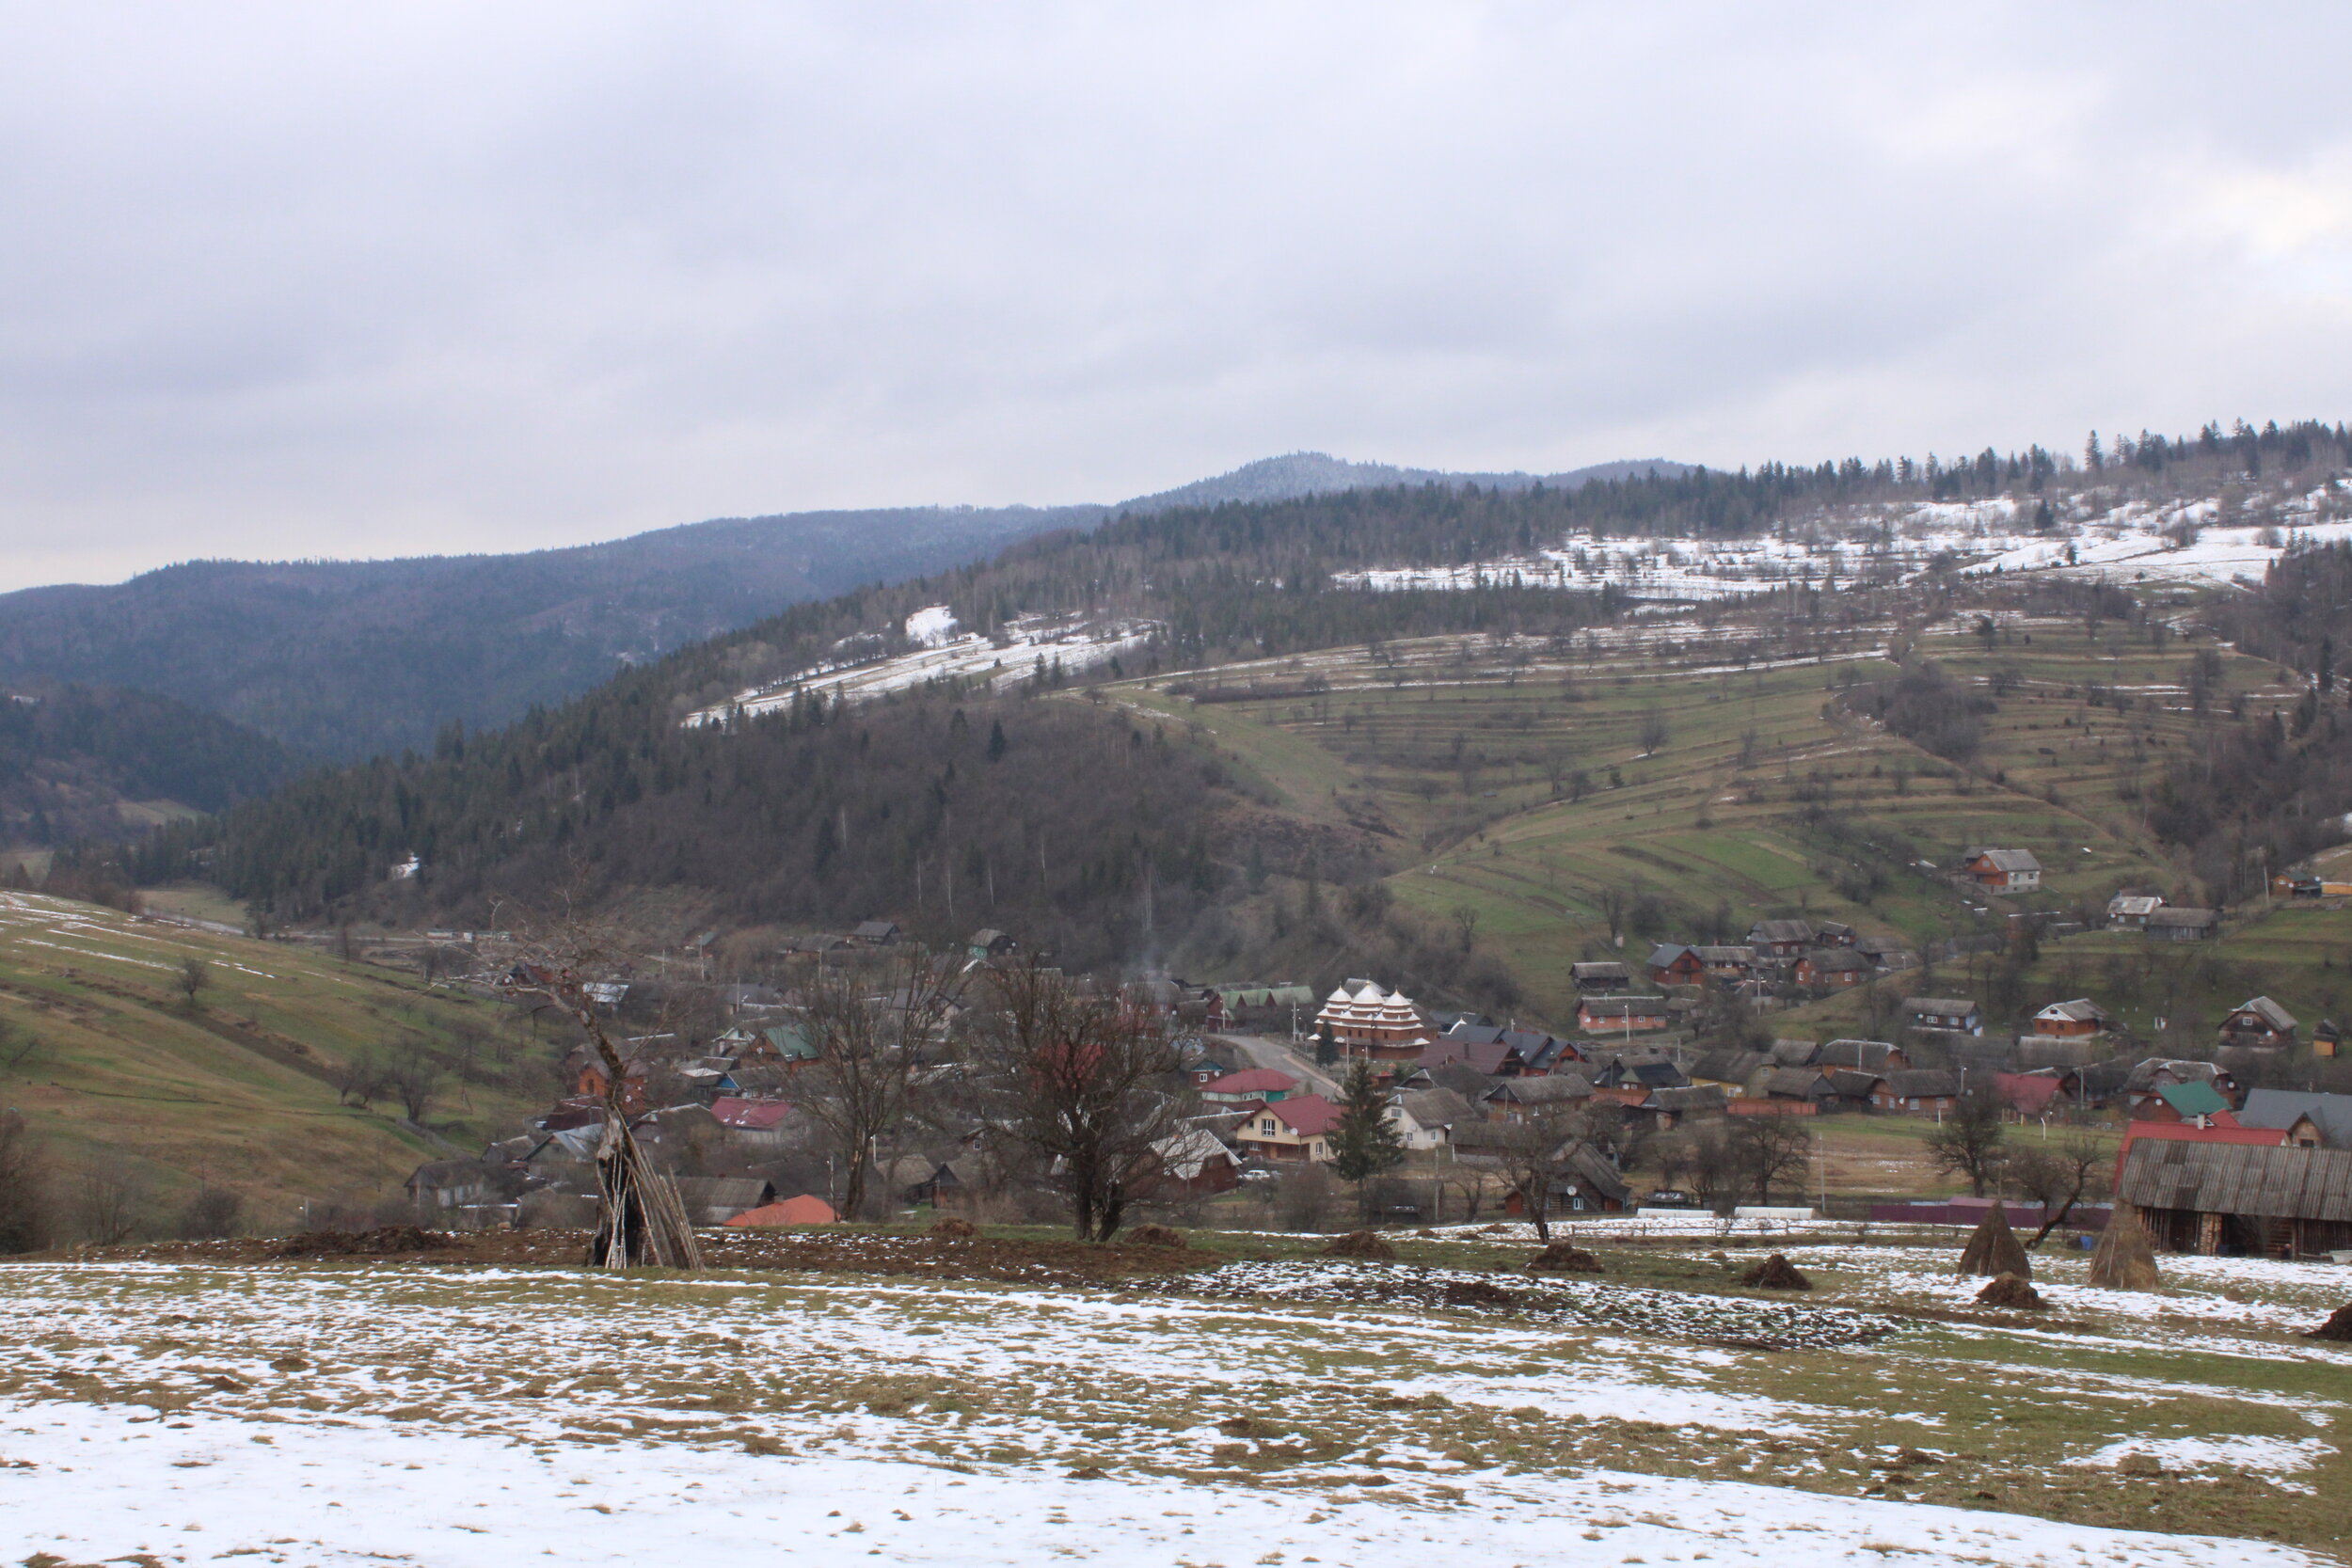   PICTURED:  The town at the bottom of the valley before our ascent to Lopata Mountain is inhabited by Boykos, one of the mountain peoples of Ukraine, who tend to stay in the foothills.  